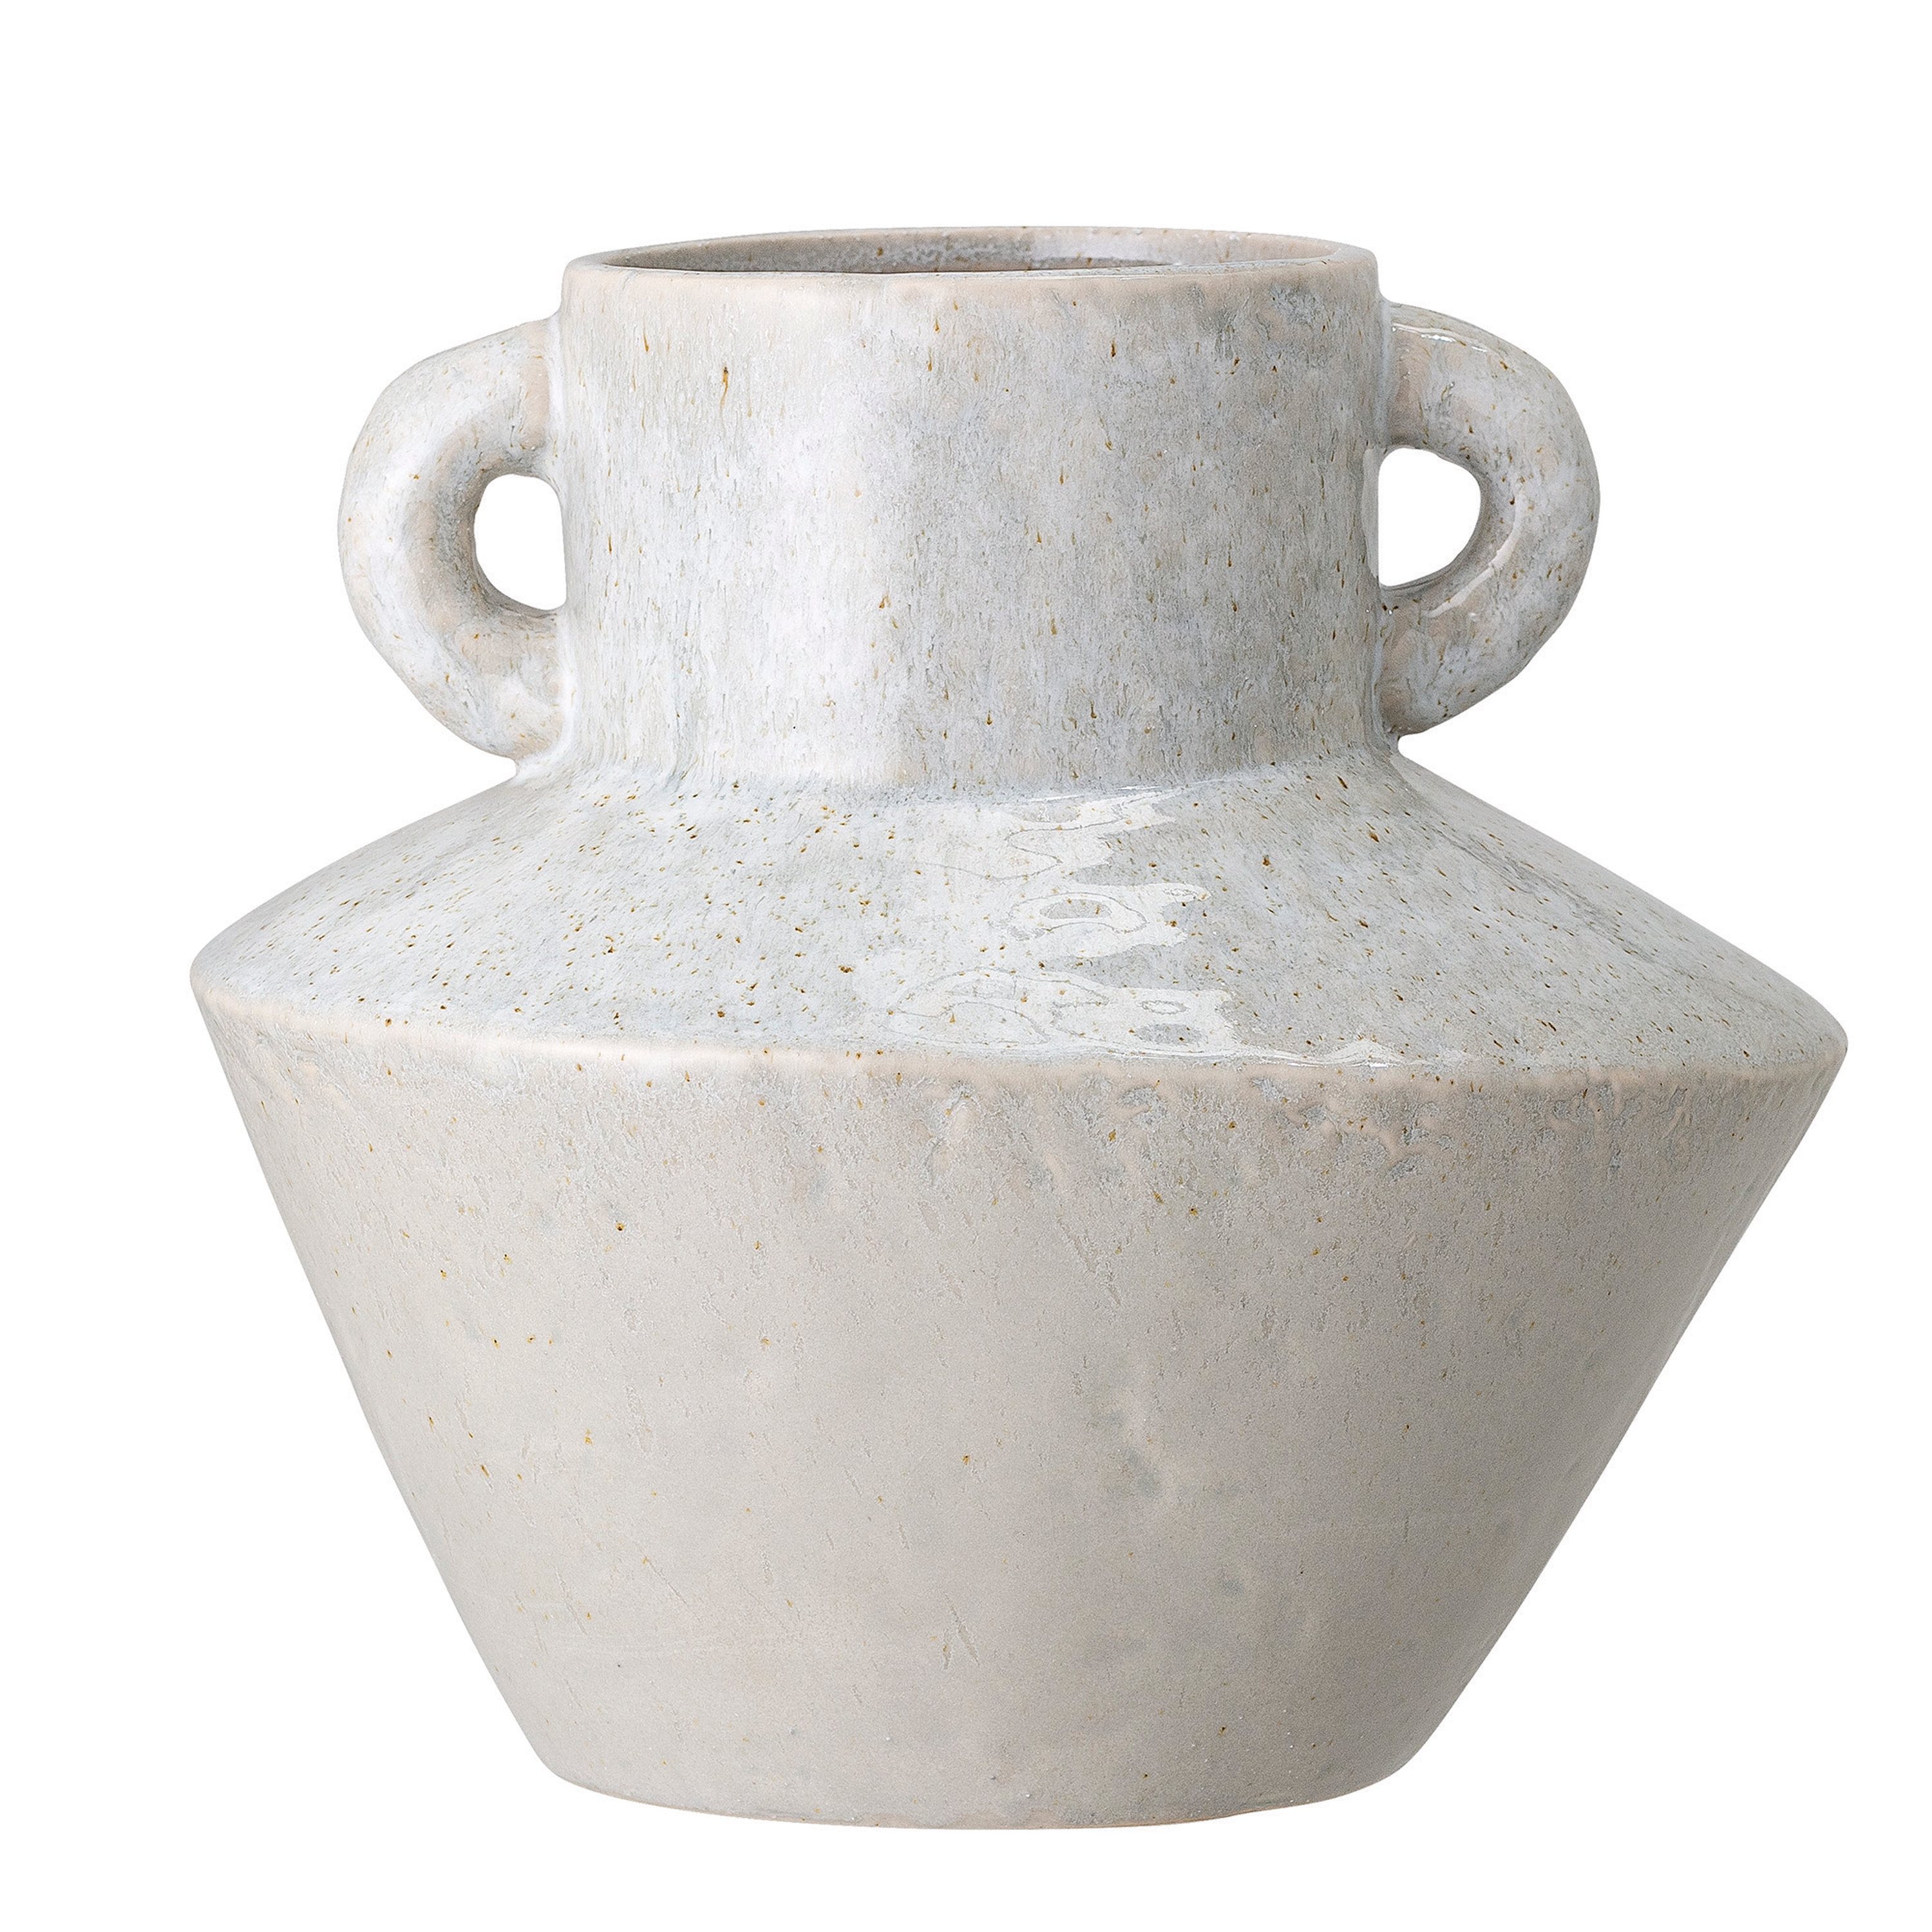 8.25"H Stoneware Vase with Reactive Glaze Finish & Vertical Handles (Each one will vary) - Image 0